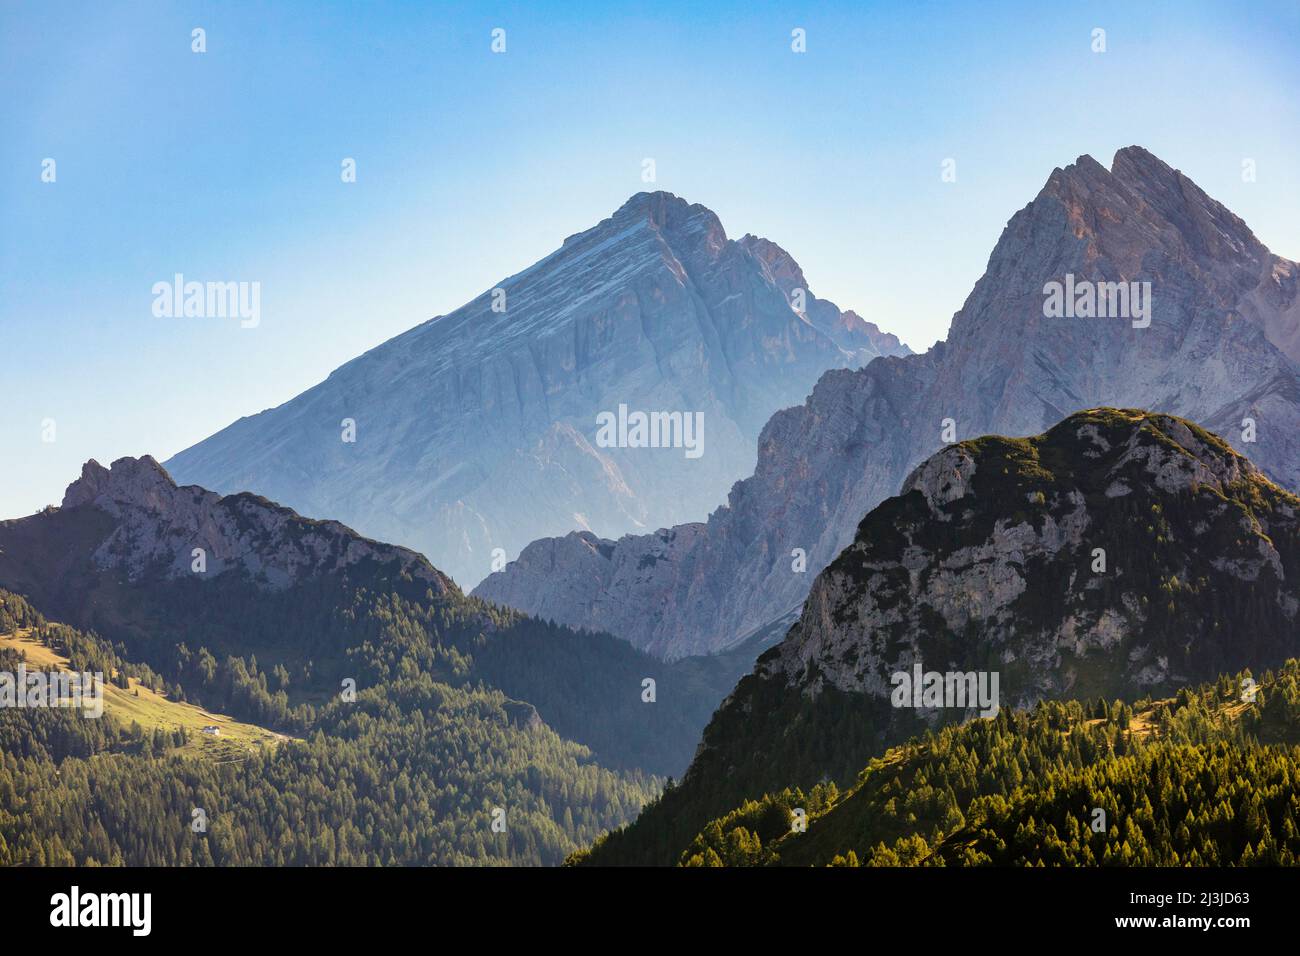 Europe, Italy, Veneto, province of Belluno, view of the Antelao on background, Cime di Forca Rossa in the middle and Crot in foreground, Dolomites Stock Photo